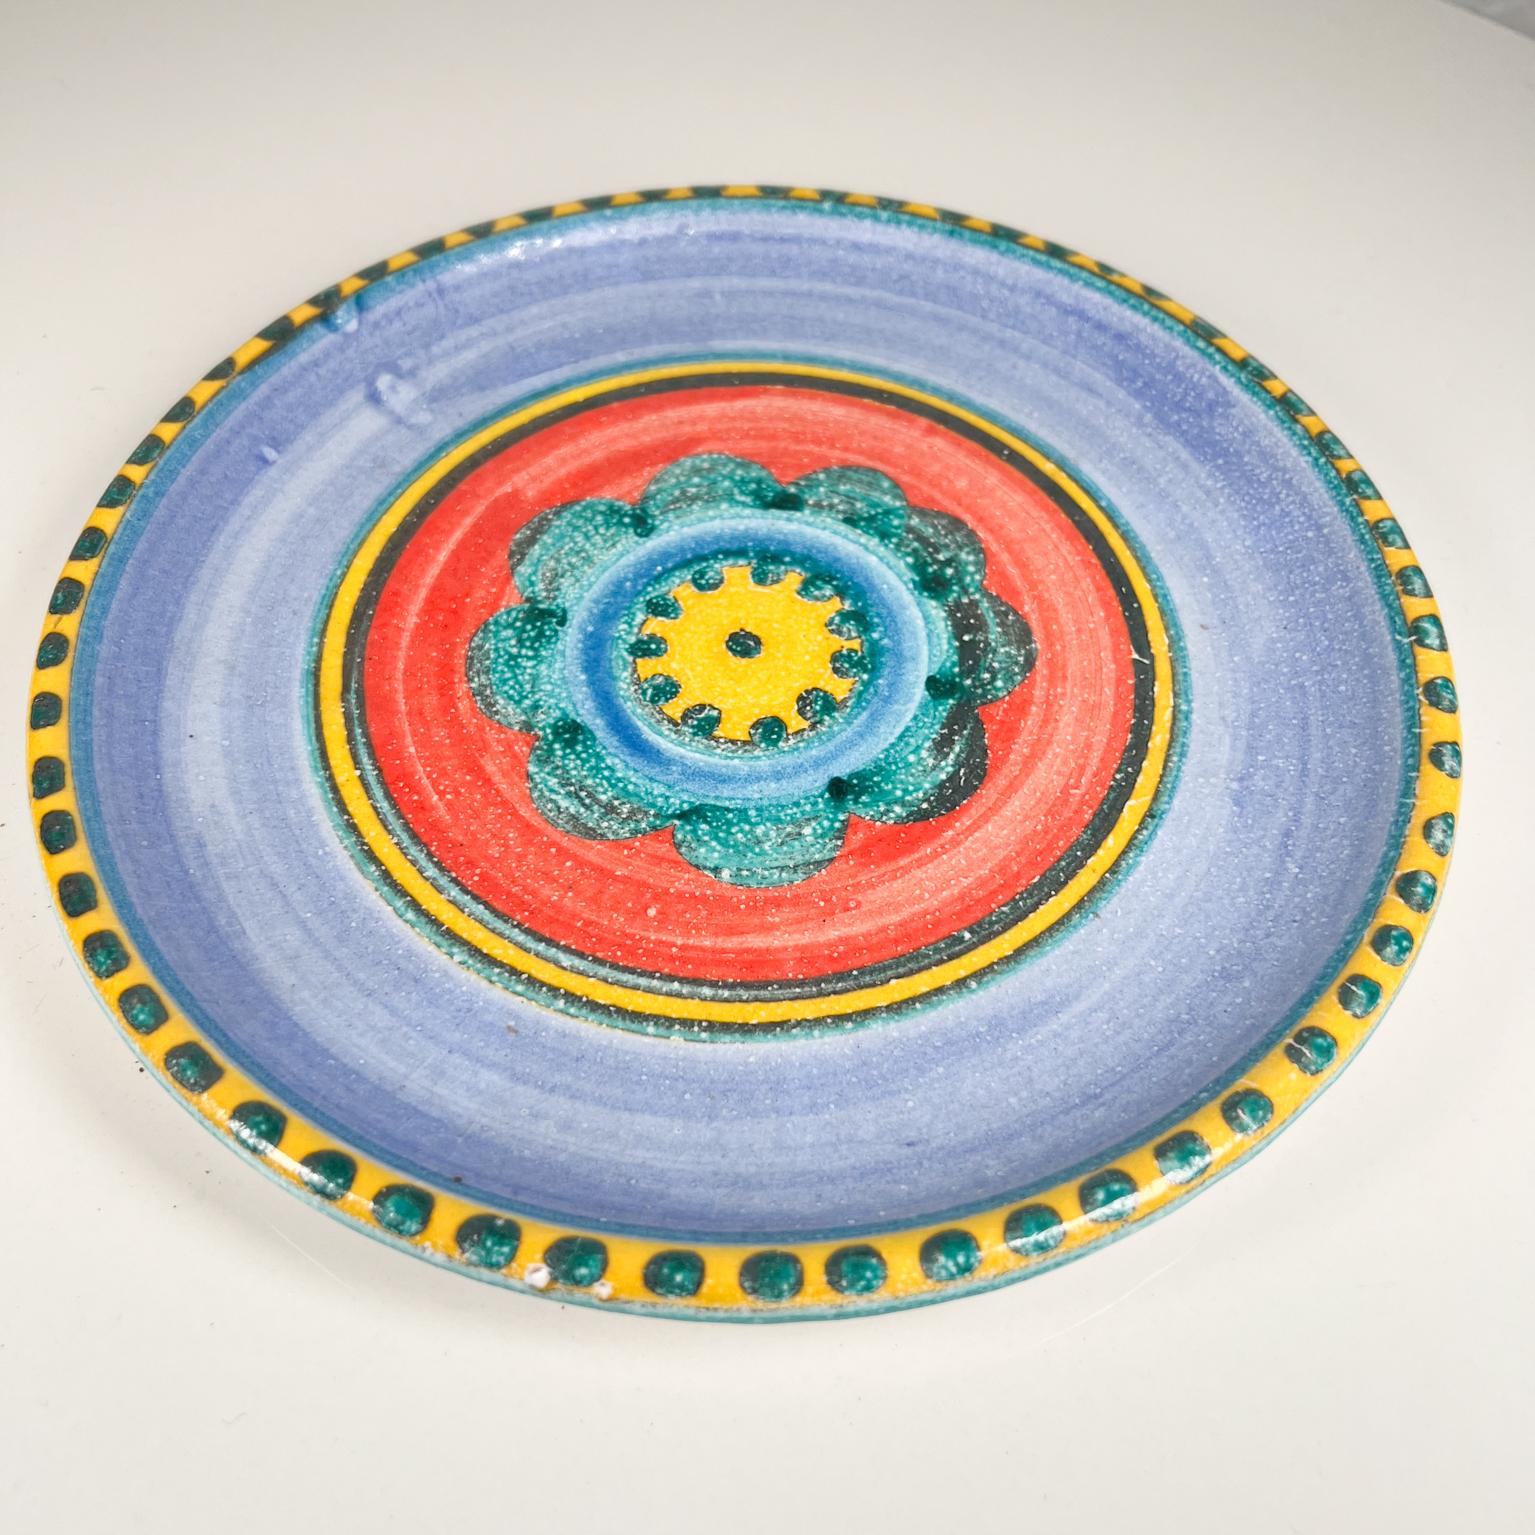 1960s, DeSimone pottery of Italy colorful ceramic art hand painted blue flower plate.
Giovanni Desimone Italy.
Colorful blue flower.
Measures: 8.88 diameter x .88 tall.
Inscription on the back: Desimone A 13.
Original vintage condition.
Refer